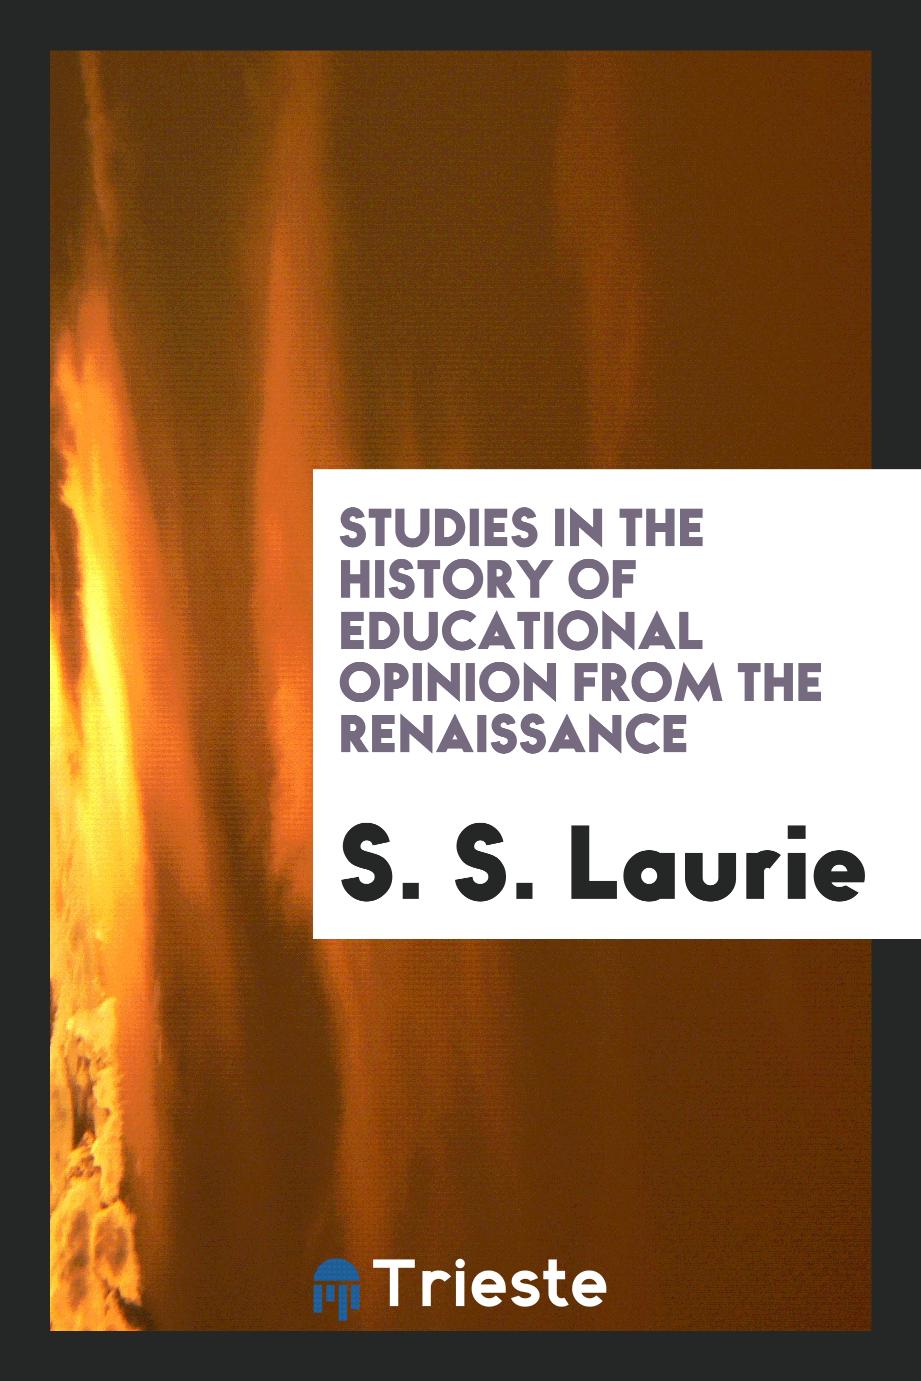 Studies in the history of educational opinion from the Renaissance